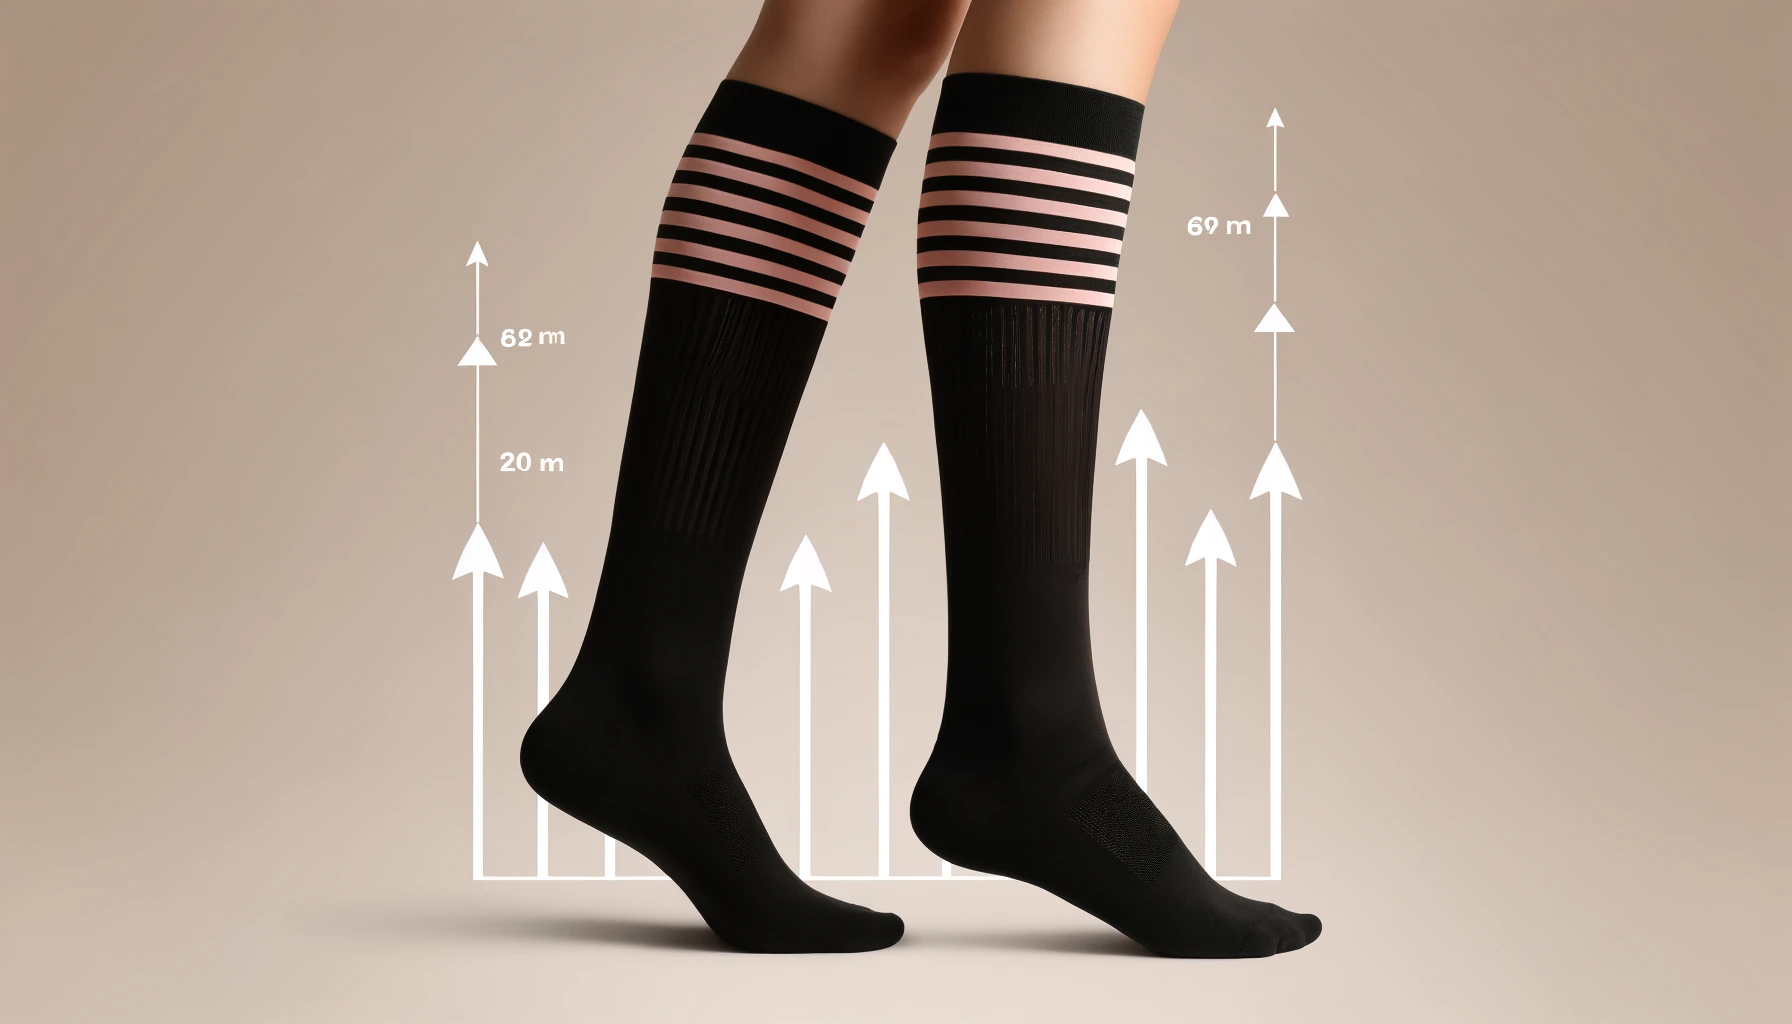 An image of compression socks designed for women, tightly fitting the lower half of the legs, focusing on the ankle and foot. The socks should be black with three soft pink horizontal stripes at the top of the compression area. They should be shown worn on a pair of women's legs, which are raised to highlight the fit and compression effect. Upward arrows illustrate the compression effect, implying improved blood circulation. The backdrop should be neutral to not distract from the socks. The image should have a 16:9 aspect ratio.